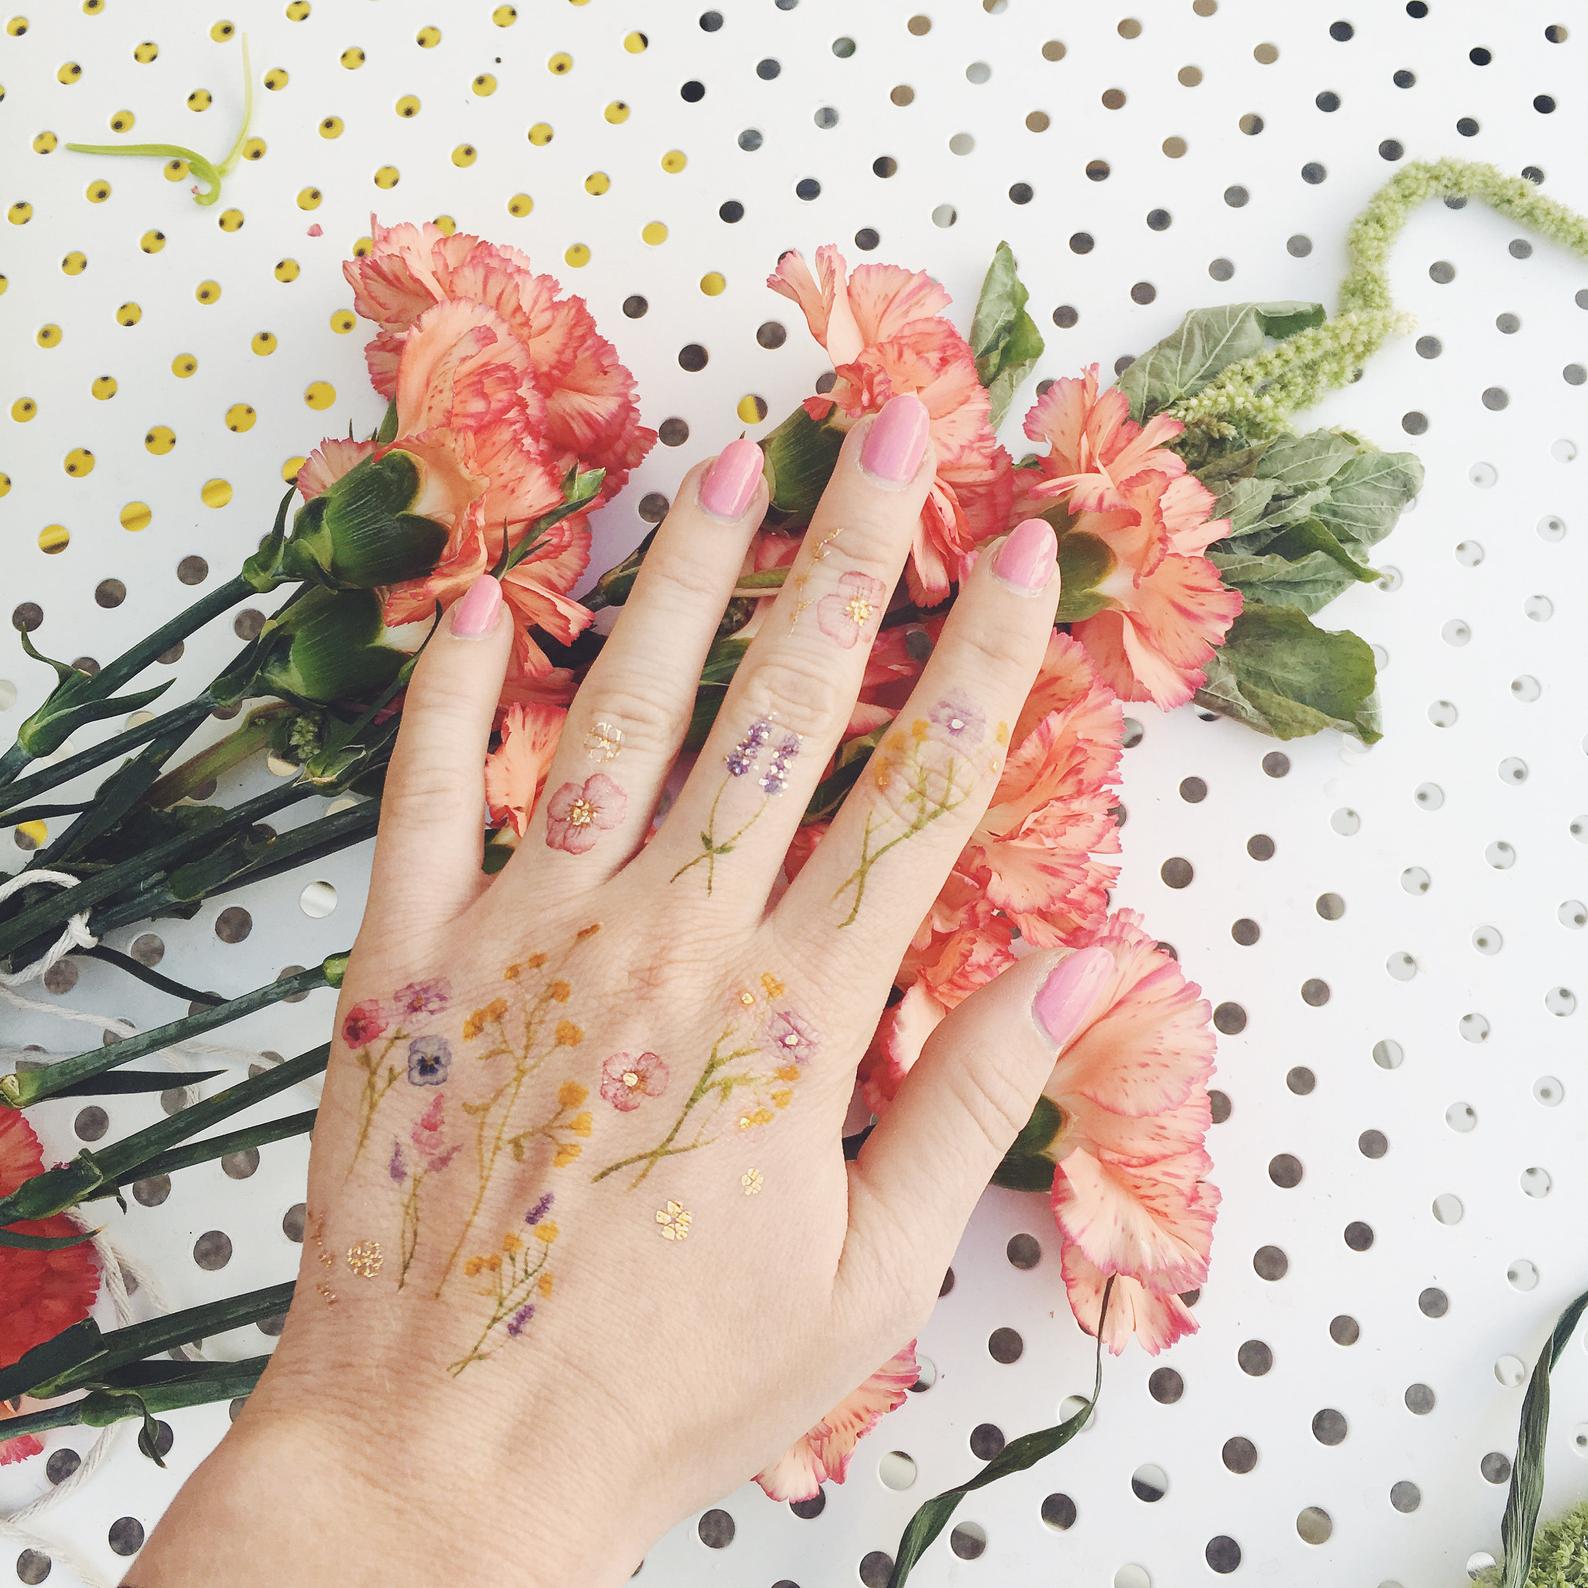 These gorgeous plantinspired tattoos will help you feel connected to nature